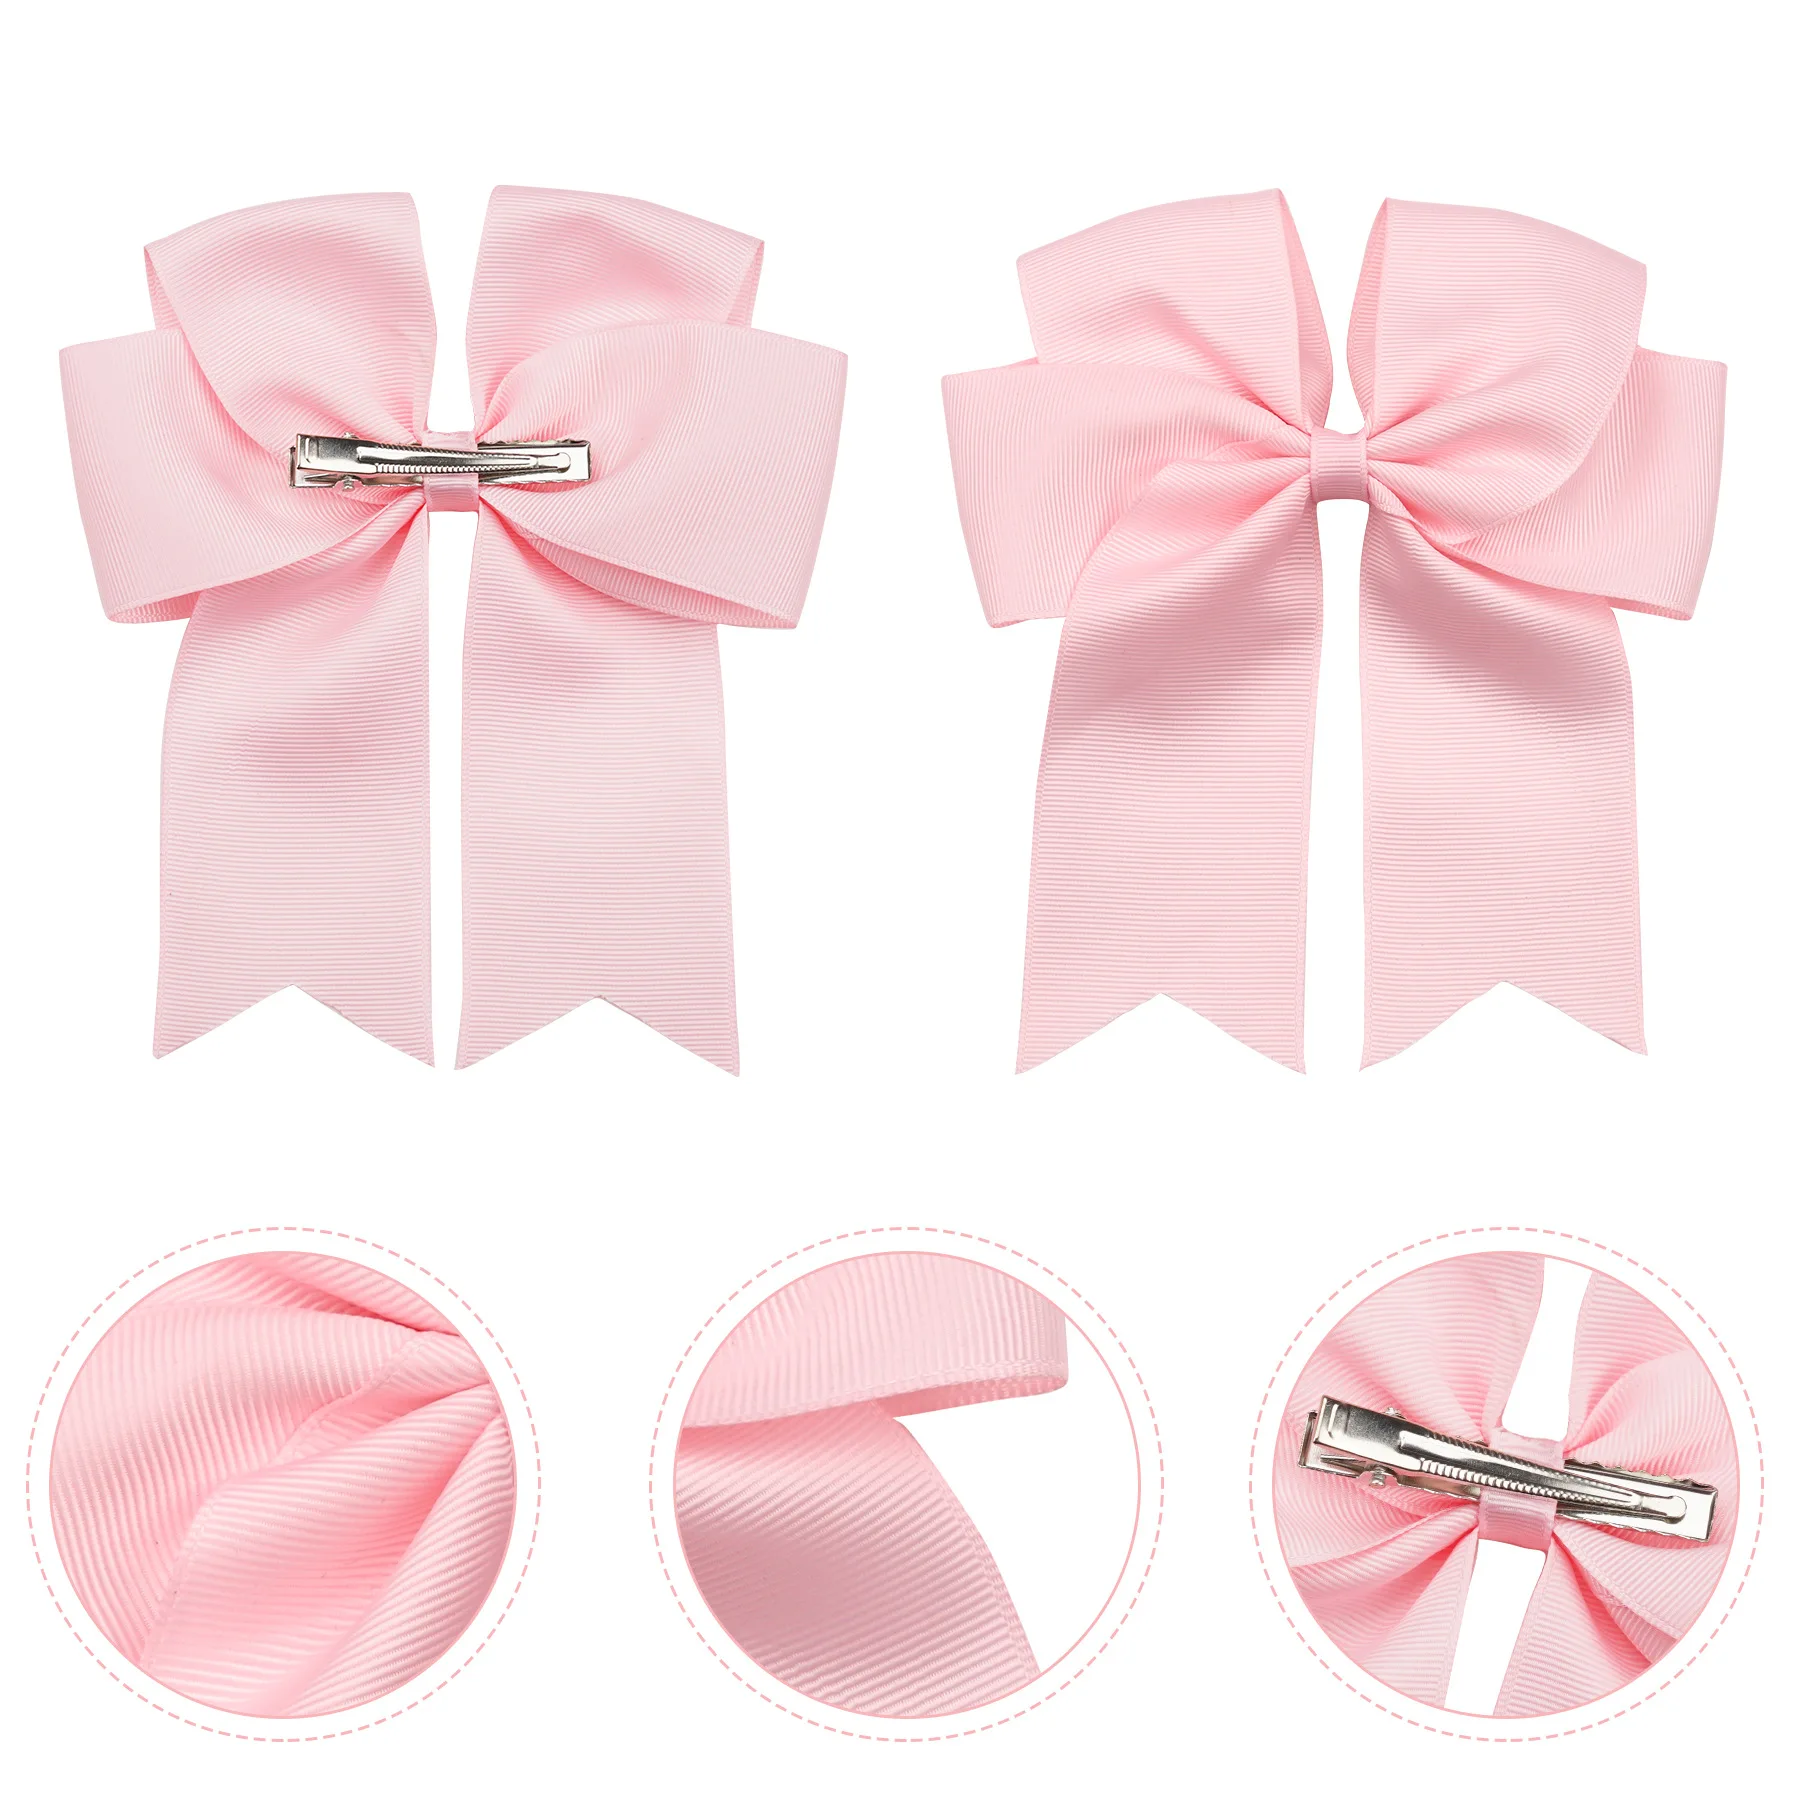 New Stock Arrival 6 Inch Dovetail Bow Hairpin Double Fishtail Ribbon ...